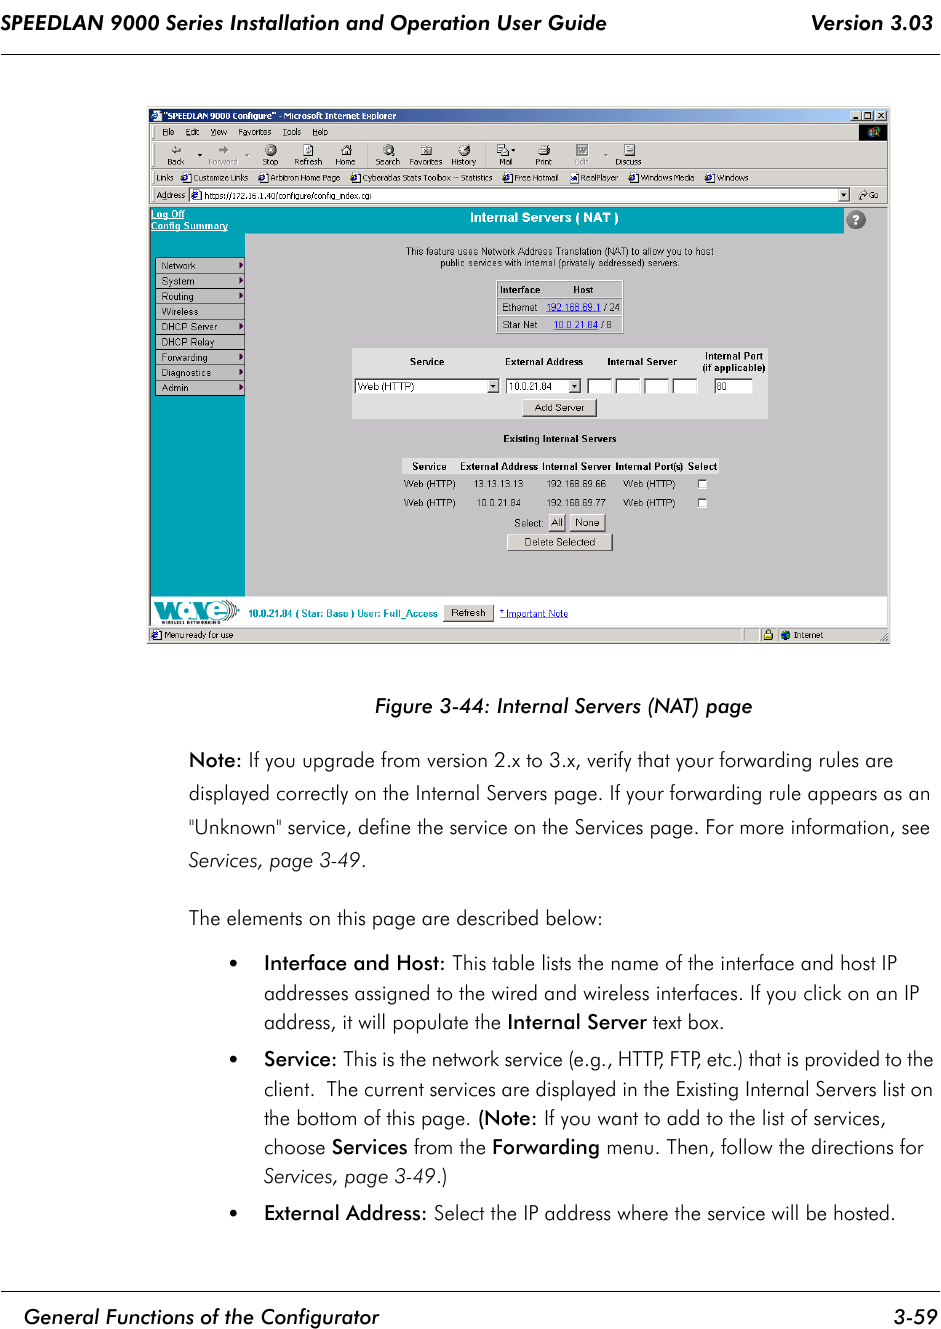 SPEEDLAN 9000 Series Installation and Operation User Guide                                 Version 3.03     General Functions of the Configurator 3-59                                                                                                                                                              Figure 3-44: Internal Servers (NAT) pageNote: If you upgrade from version 2.x to 3.x, verify that your forwarding rules are displayed correctly on the Internal Servers page. If your forwarding rule appears as an &quot;Unknown&quot; service, define the service on the Services page. For more information, see Services, page 3-49.The elements on this page are described below:•Interface and Host: This table lists the name of the interface and host IP addresses assigned to the wired and wireless interfaces. If you click on an IP address, it will populate the Internal Server text box.•Service: This is the network service (e.g., HTTP, FTP, etc.) that is provided to the client.  The current services are displayed in the Existing Internal Servers list on the bottom of this page. (Note: If you want to add to the list of services, choose Services from the Forwarding menu. Then, follow the directions for Services, page 3-49.)•External Address: Select the IP address where the service will be hosted.